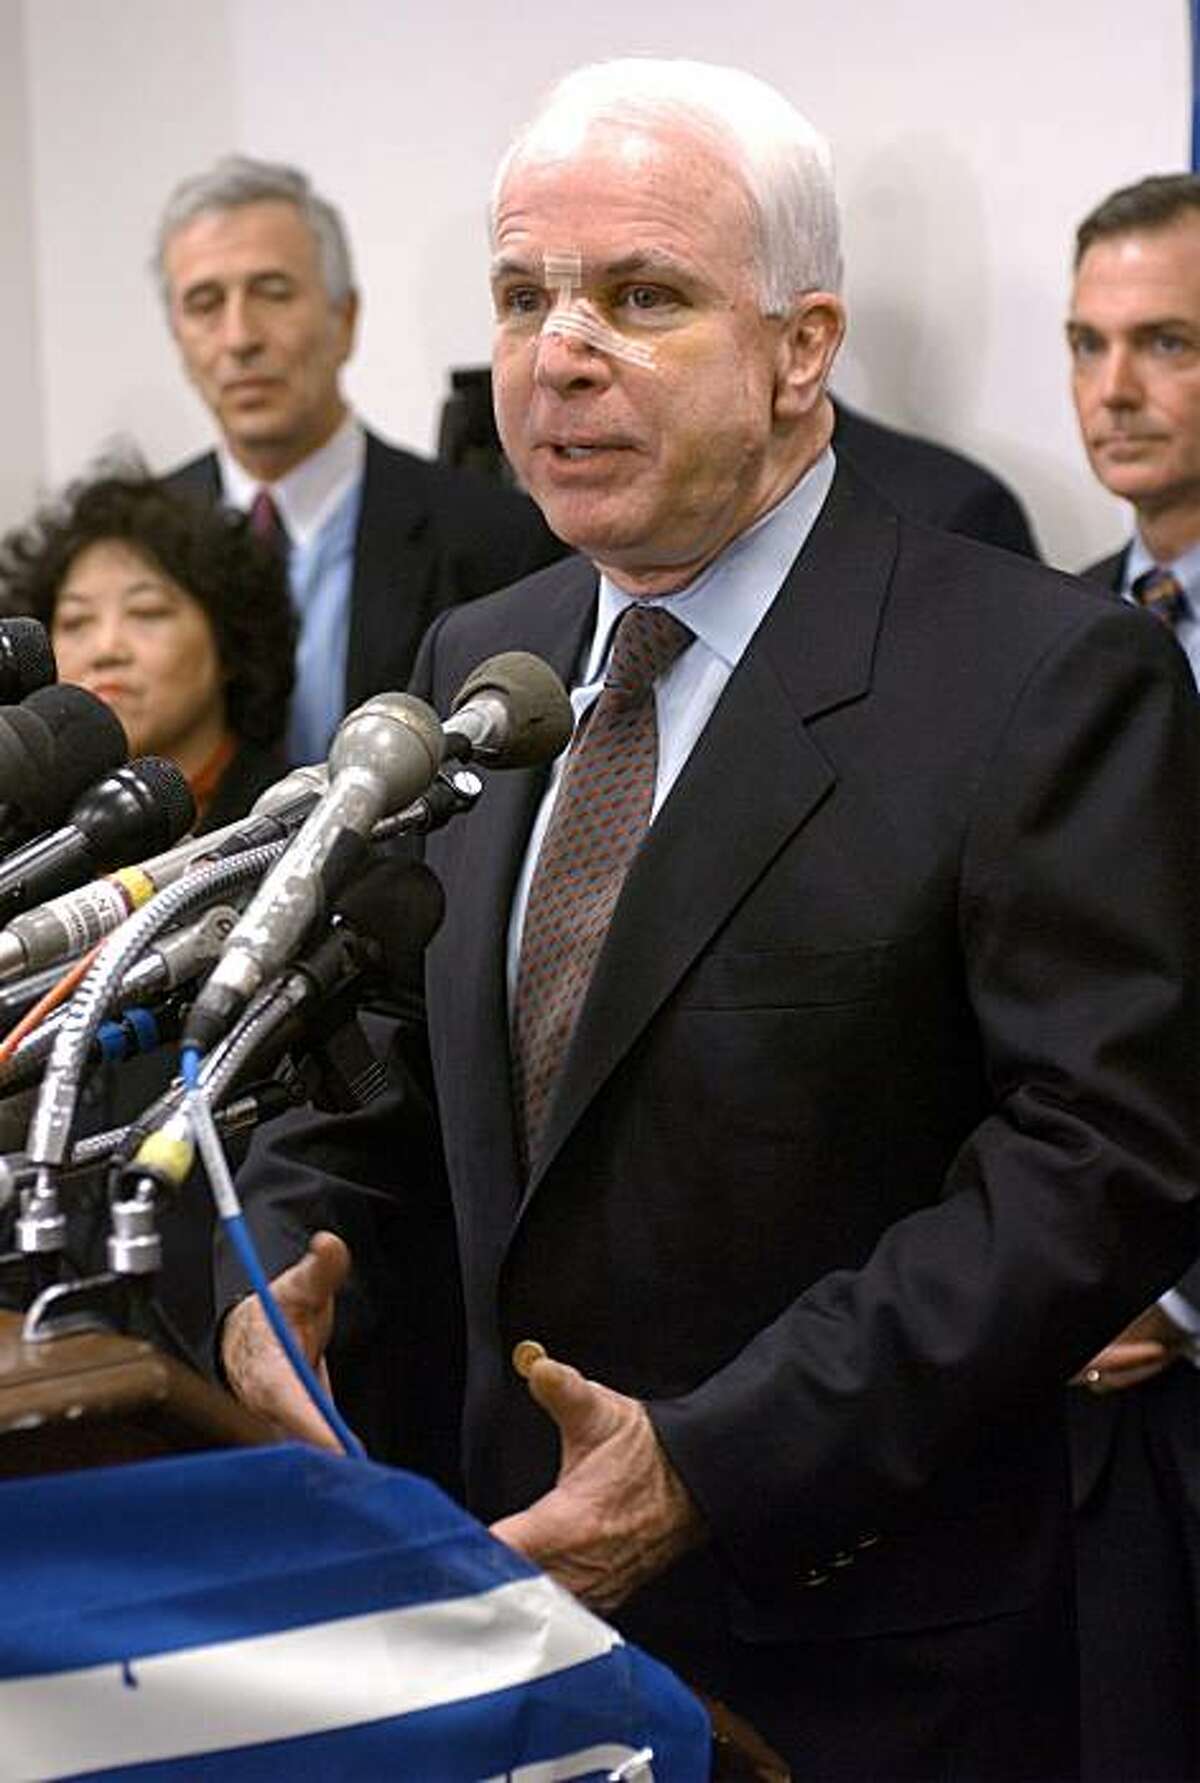 ** FILE** In this Feb. 11, 2002 file photo, a bandaged Sen. John McCain, R-Ariz., takes part in a Washington news conference to discuss campaign finance. Three-time melanoma survivor John McCain appears cancer-free, has a strong heart and is in otherwise general good health, according to eight years of medical records reviewed by The Associated Press. (AP Photo/Stephen J. Boitano)